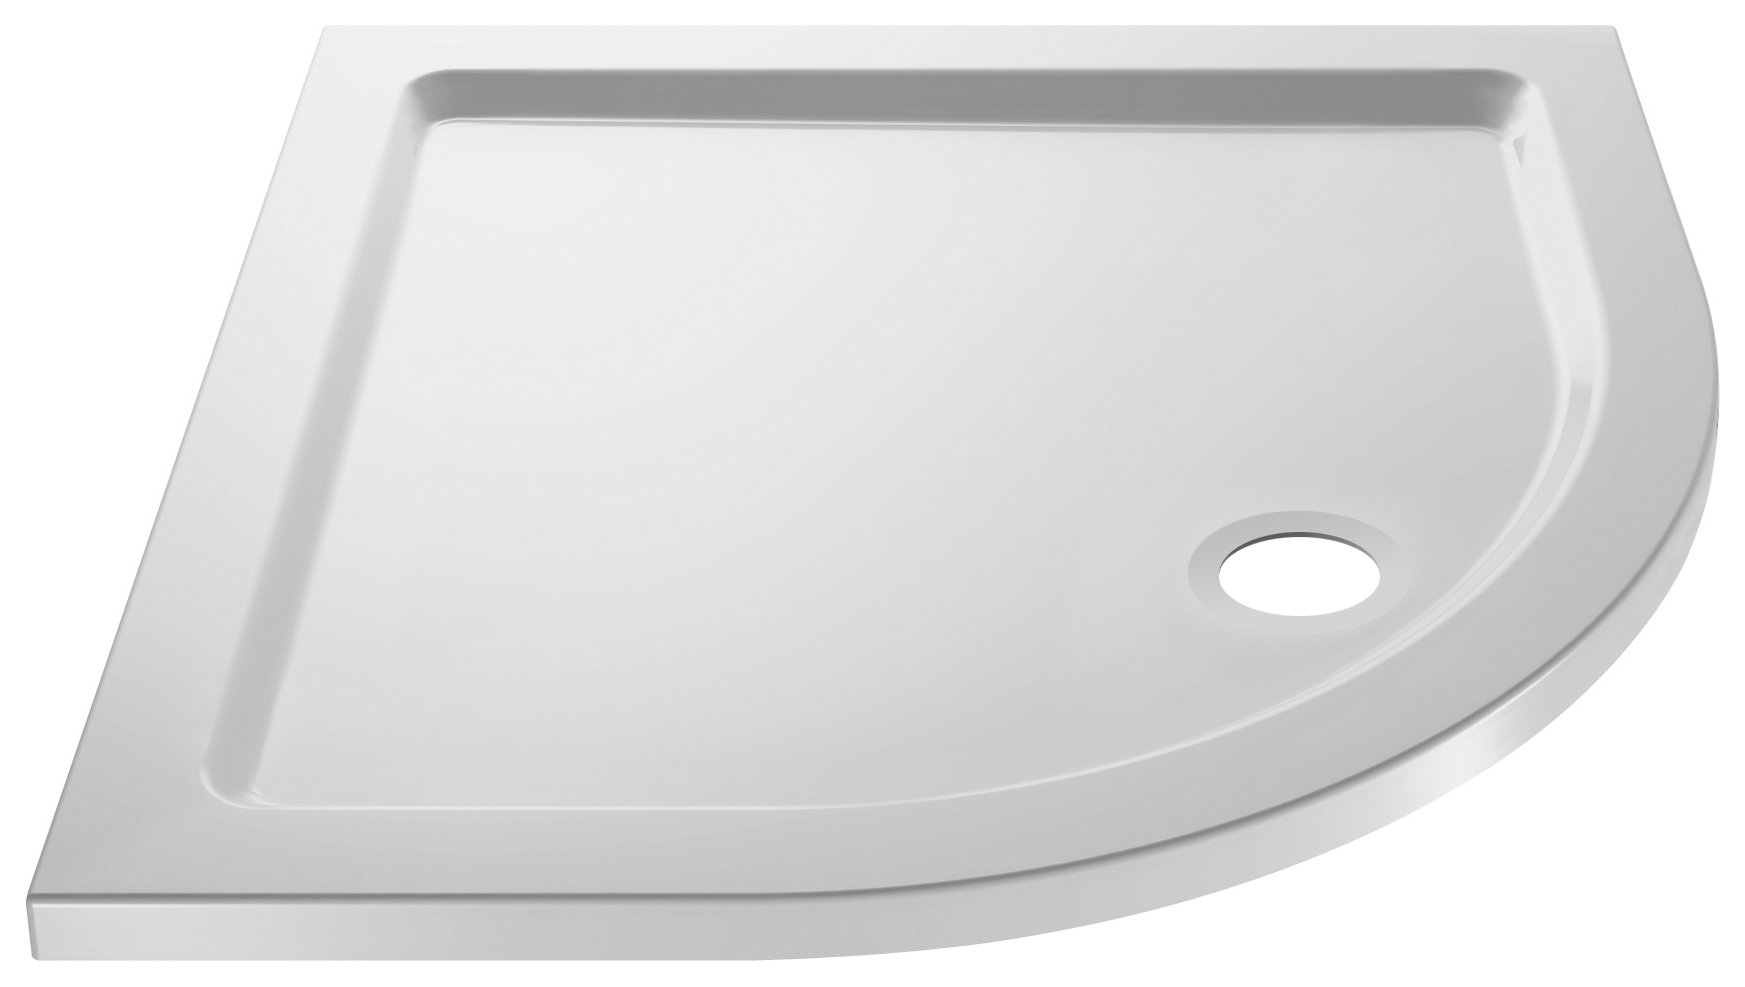 Image of Wickes 40mm Pearlstone Quadrant Shower Tray - 800 x 800mm